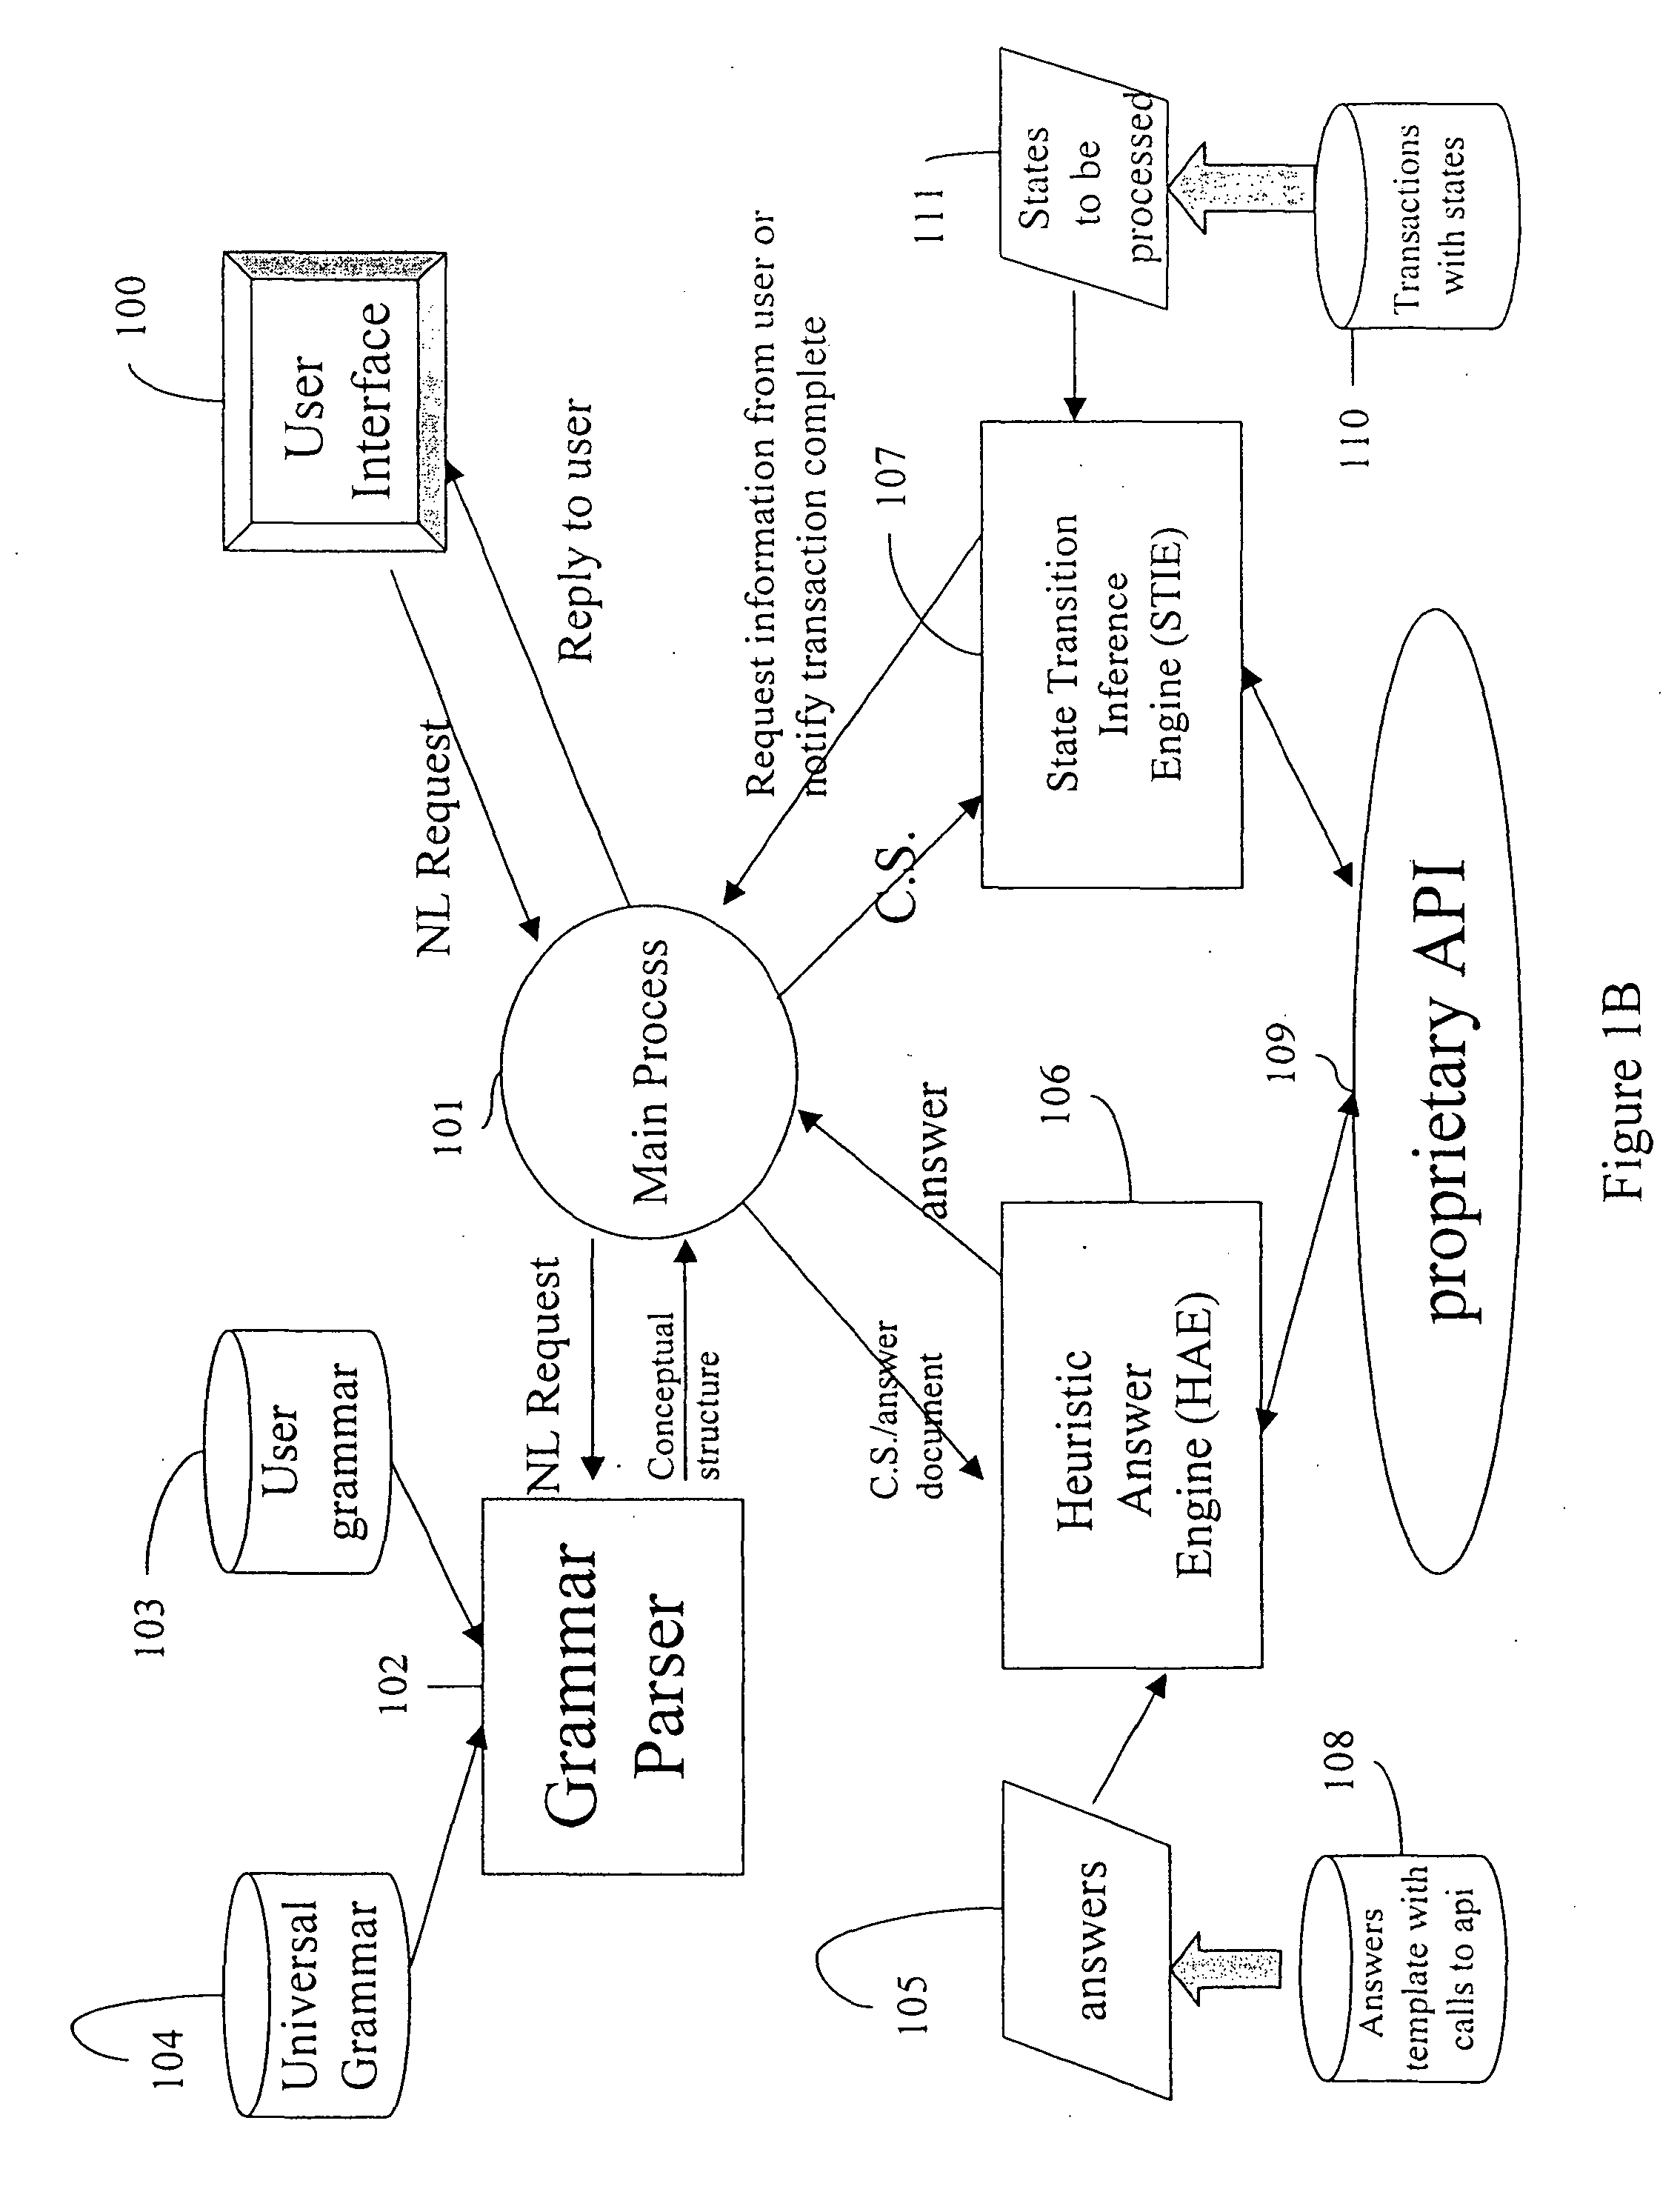 Apparatus and methods for developing conversational applications